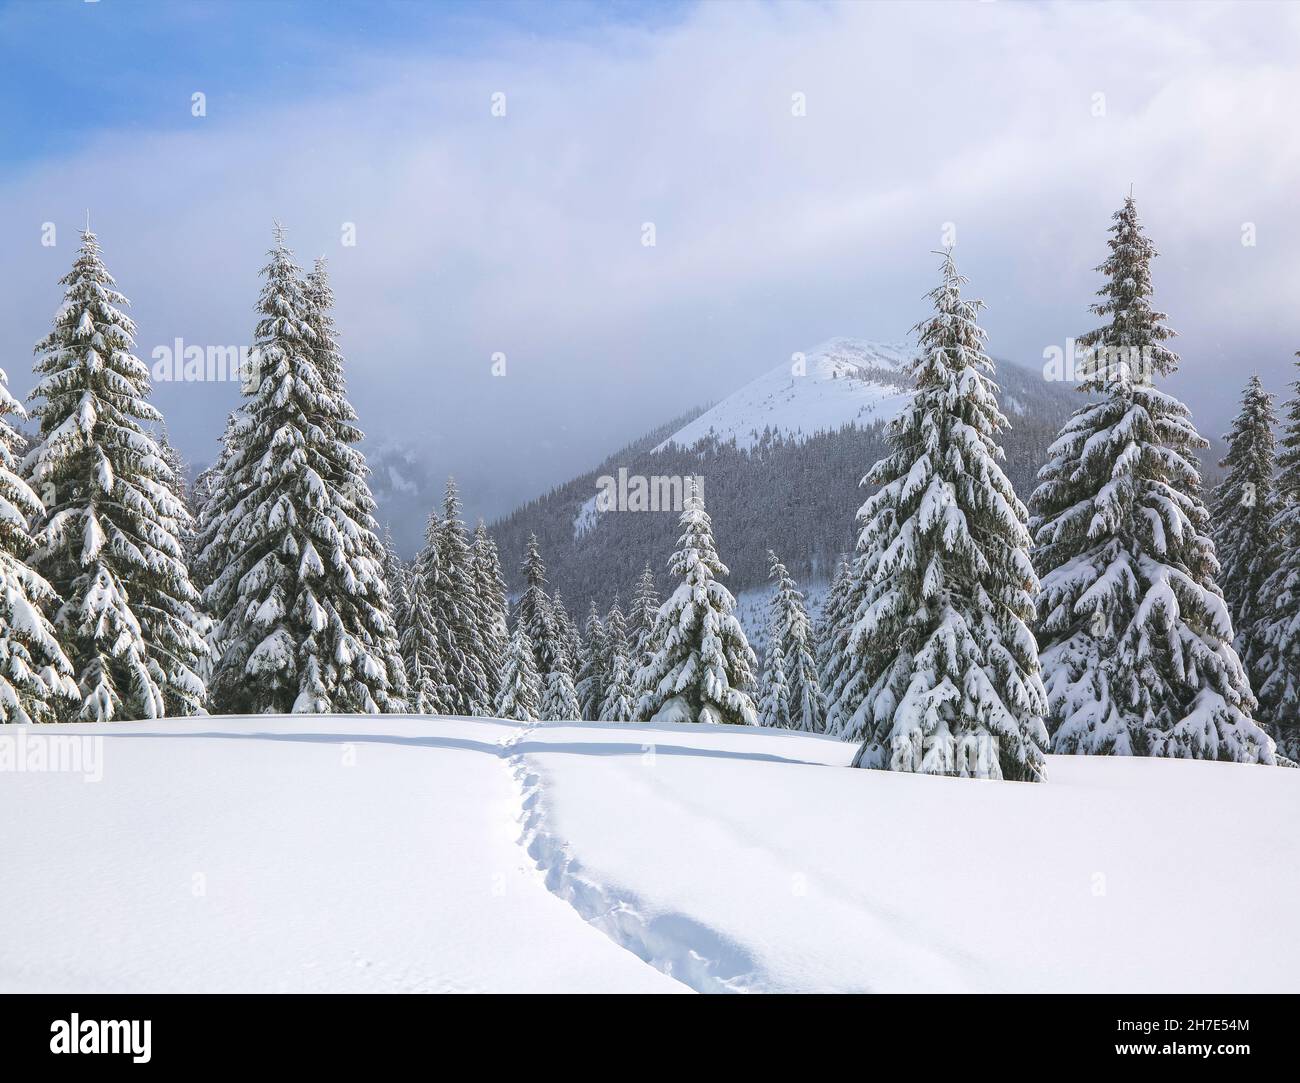 Nature winter landscape. On the lawn covered with snow there is a trodden path leading to the high mountains with snow white peak. Snowy background. L Stock Photo